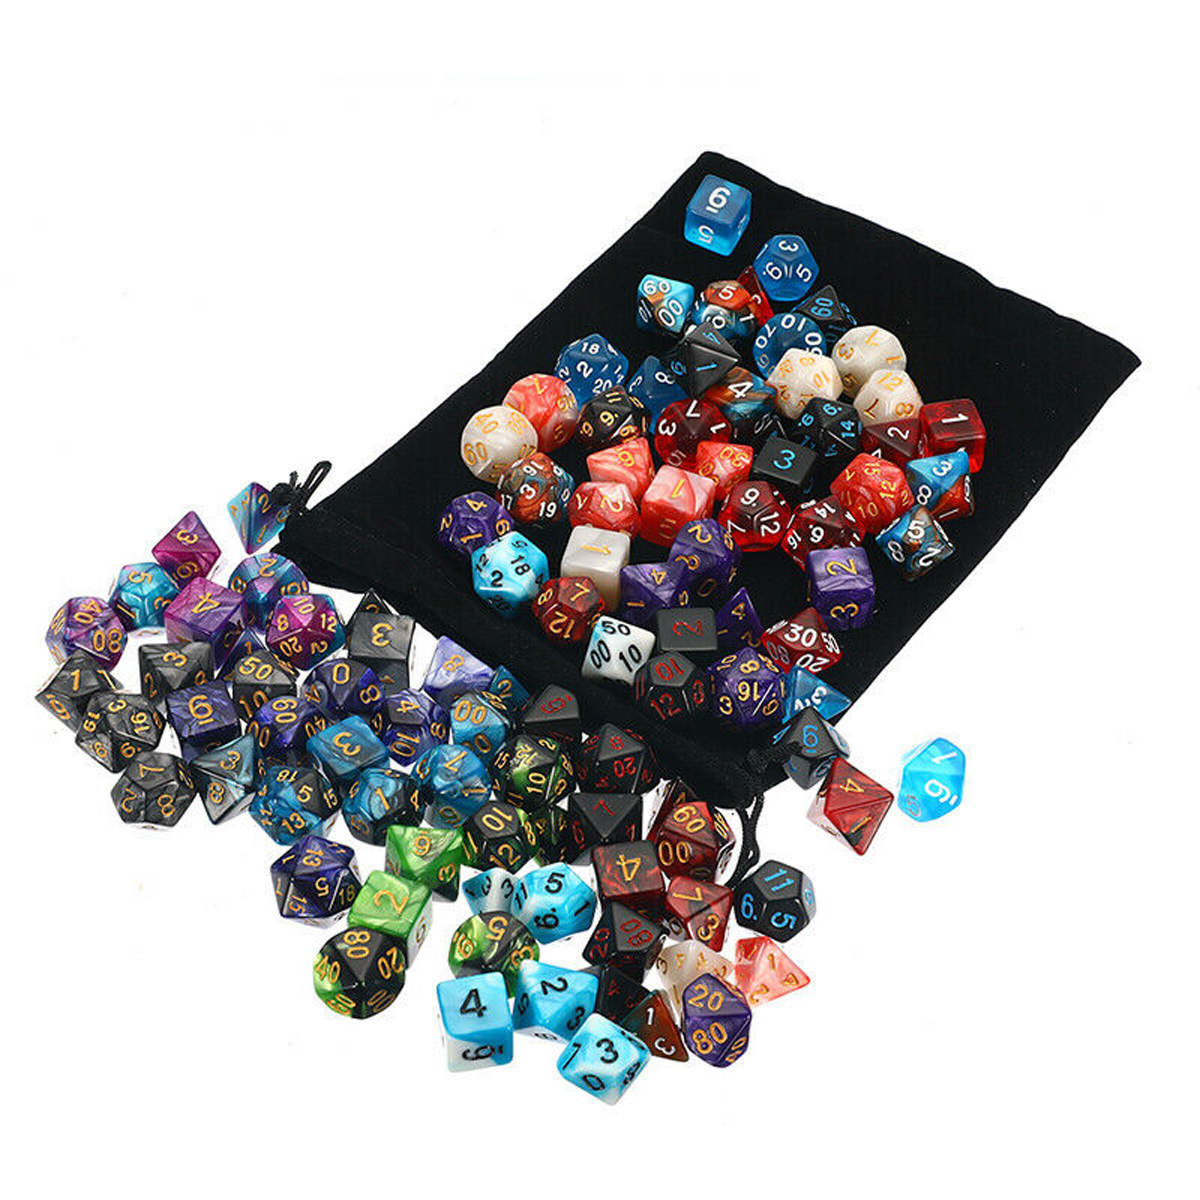 105-Pcs-Dice-Set-Polyhedral-Dices-7-Color-Role-Playing-Table-Game-With-Cloth-Game-Multi-sied-Dice-1574100-3